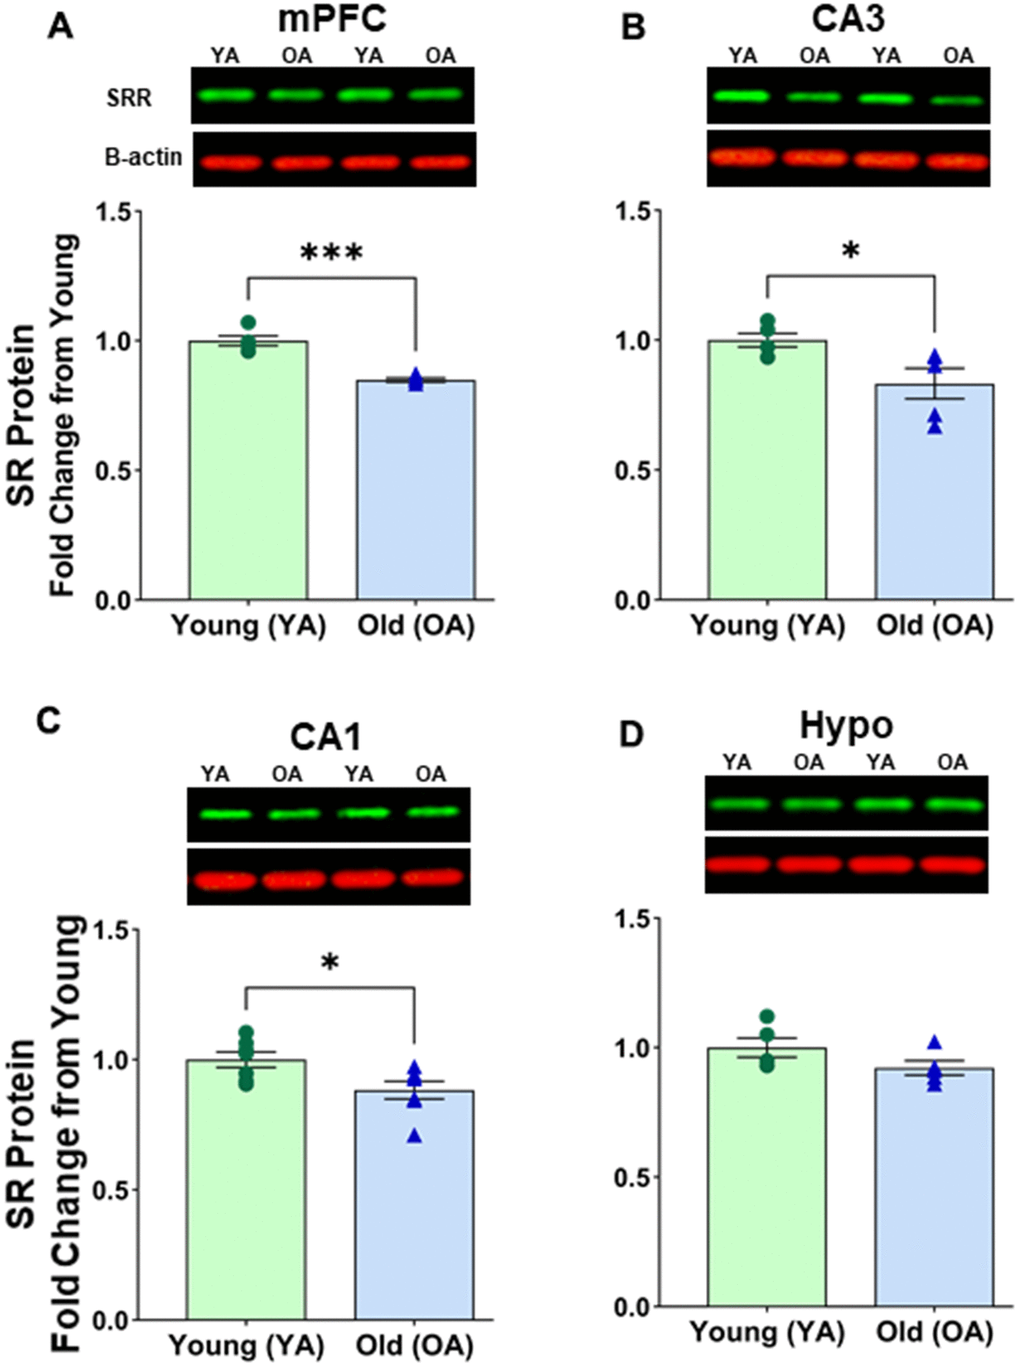 Protein levels of serine racemase were reduced with age in select areas of the female Fisher 344 rat brain. Western blots demonstrating expression of SR in (A) medial prefrontal cortex (mPFC) (B) CA3 subfield of the hippocampus, (C) CA1 subfield of the hippocampus, (D) hypothalamus (Hypo). Bar graphs illustrating the quantitative analysis of immunoreactivity for SR when normalized to total protein. B-actin is shown for visual comparison only. Blots for total protein can be seen in Supplementary Figure 2. Asterisks for p-values indicate significance (*pp